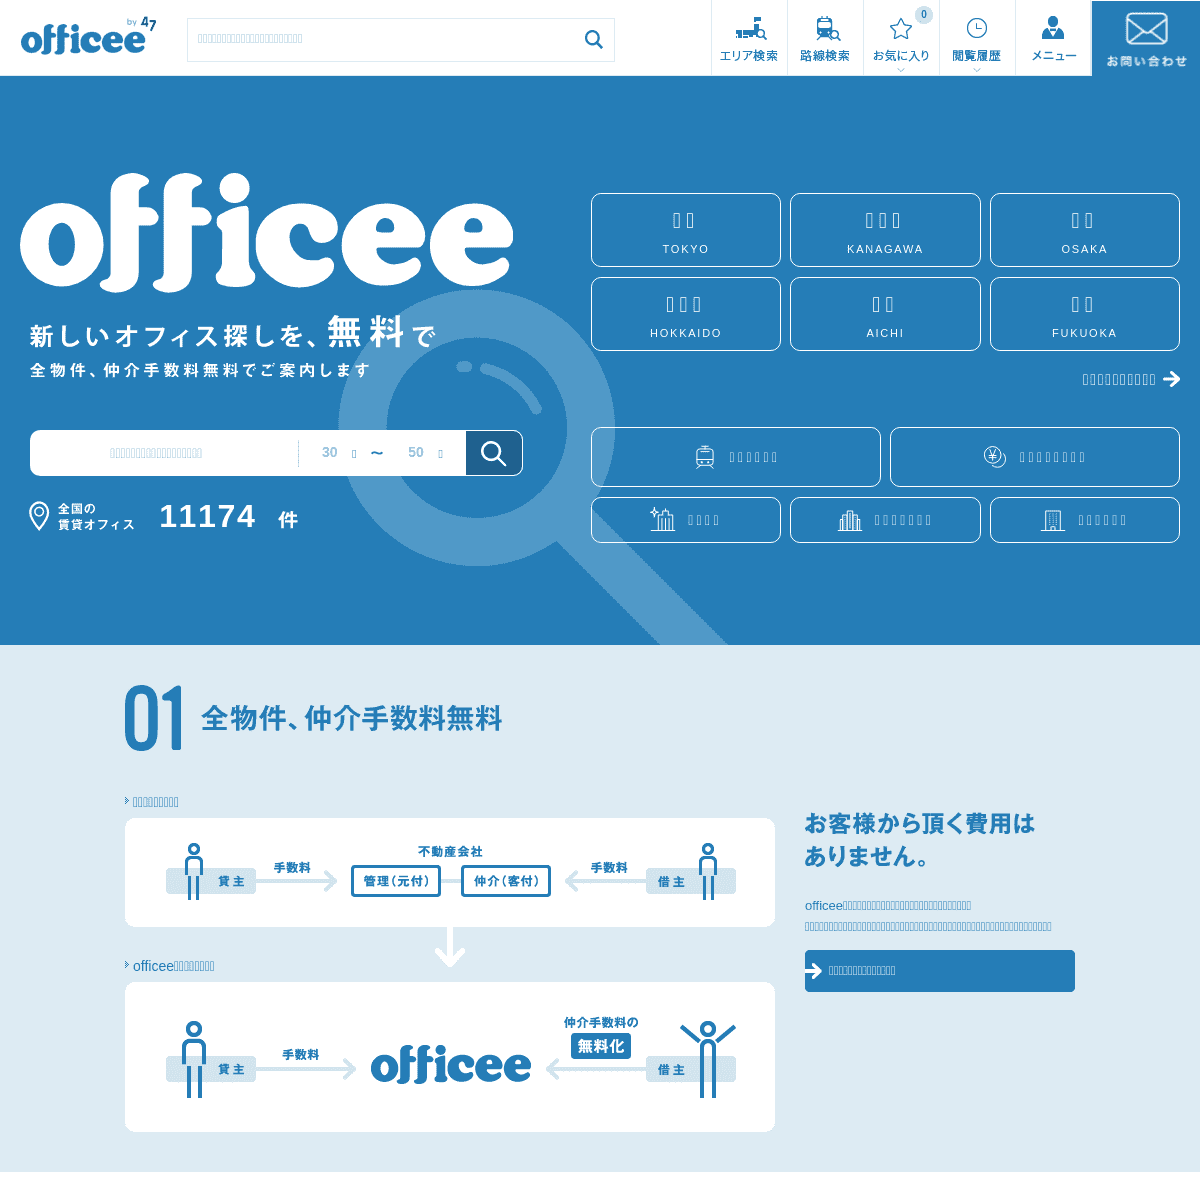 A complete backup of https://officee.jp